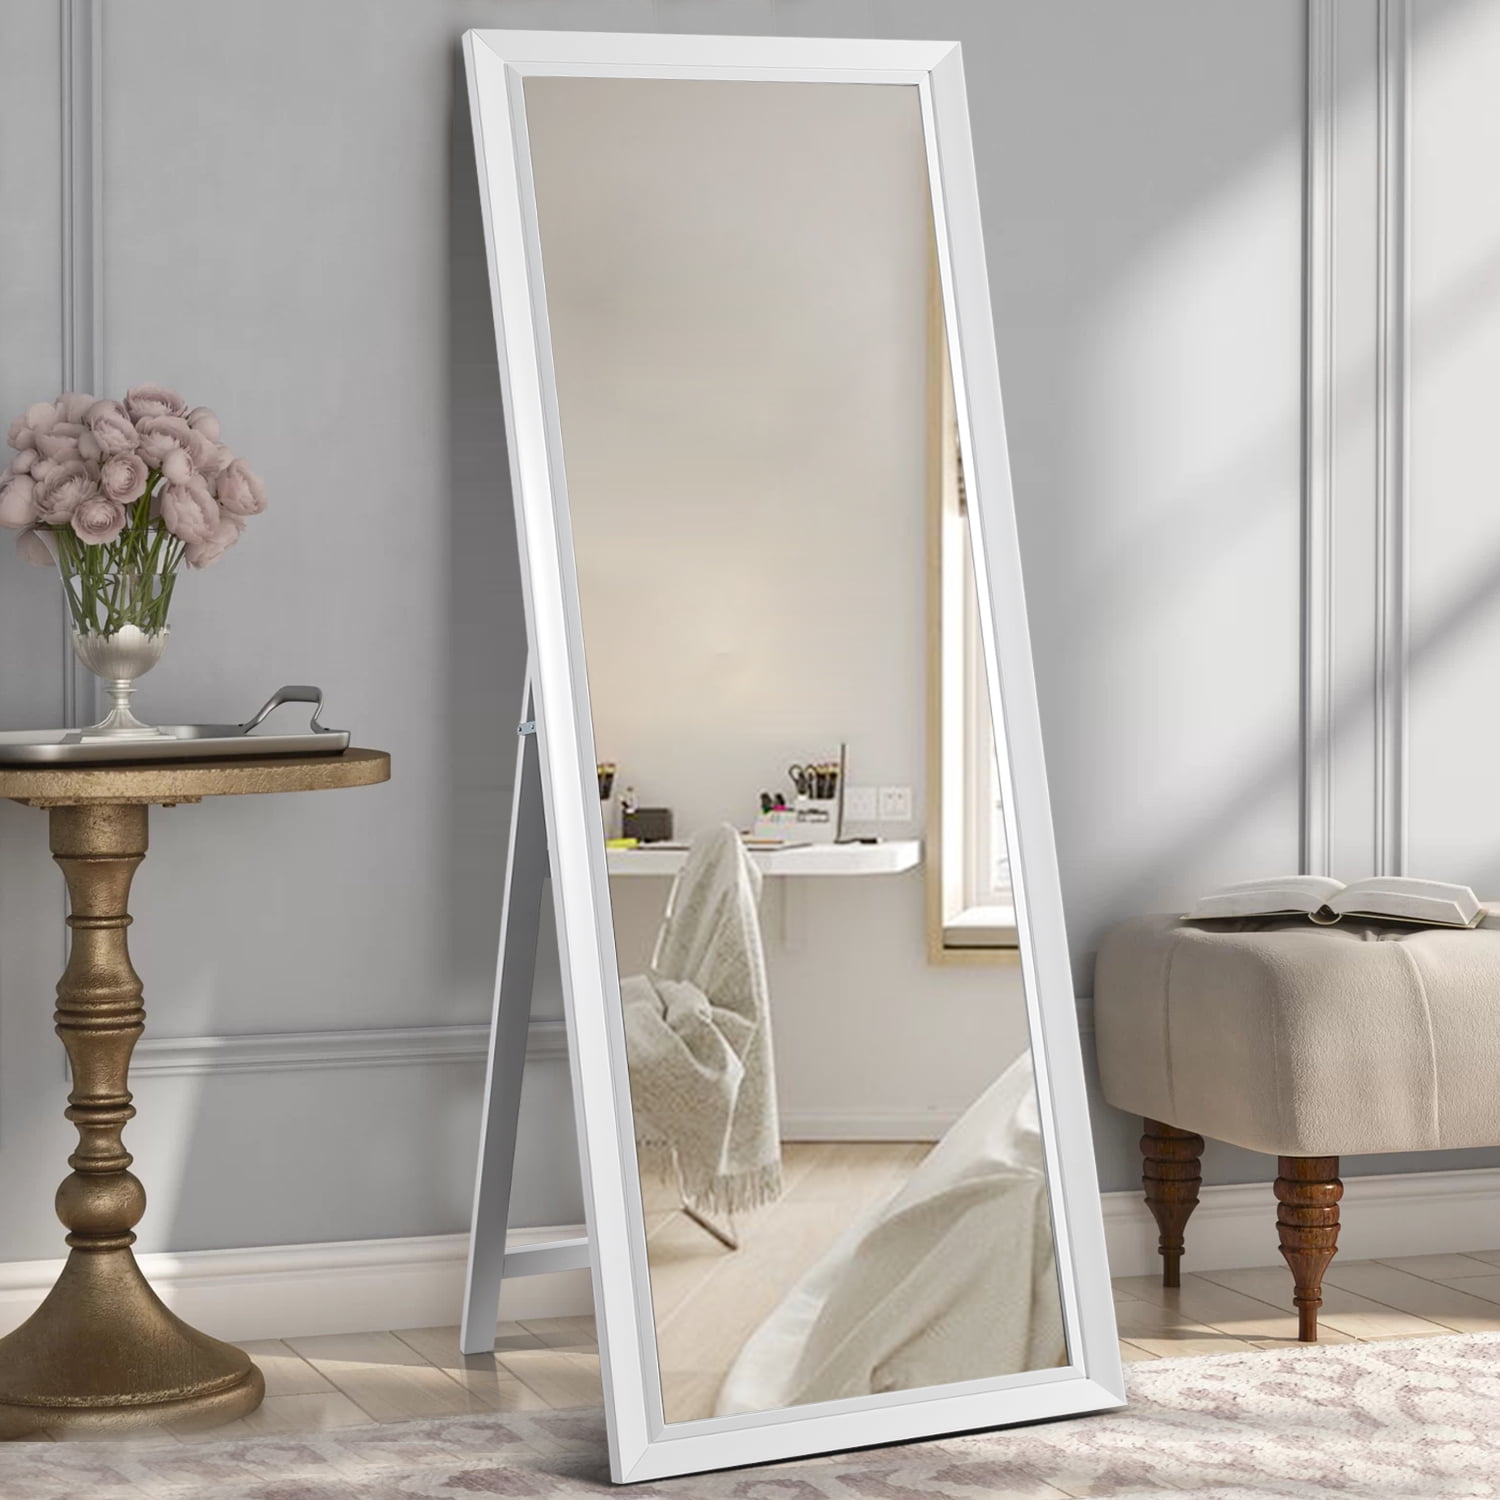 Full Length Mirror Floor Mirror with Standing Holder Wall Mounted